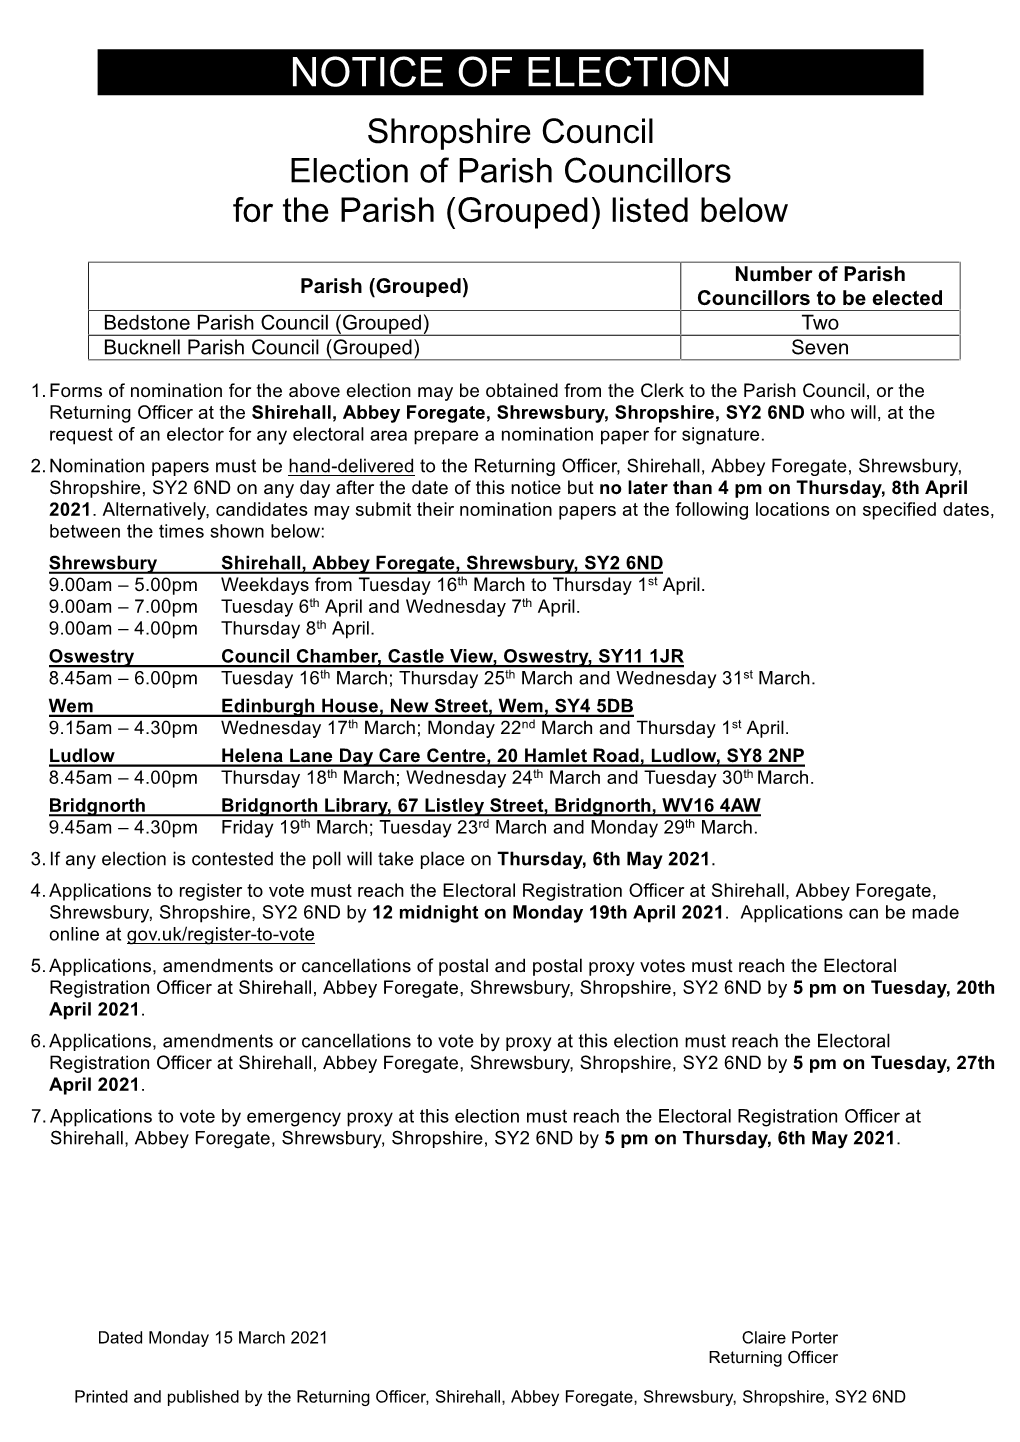 NOTICE of ELECTION Shropshire Council Election of Parish Councillors for the Parish (Grouped) Listed Below